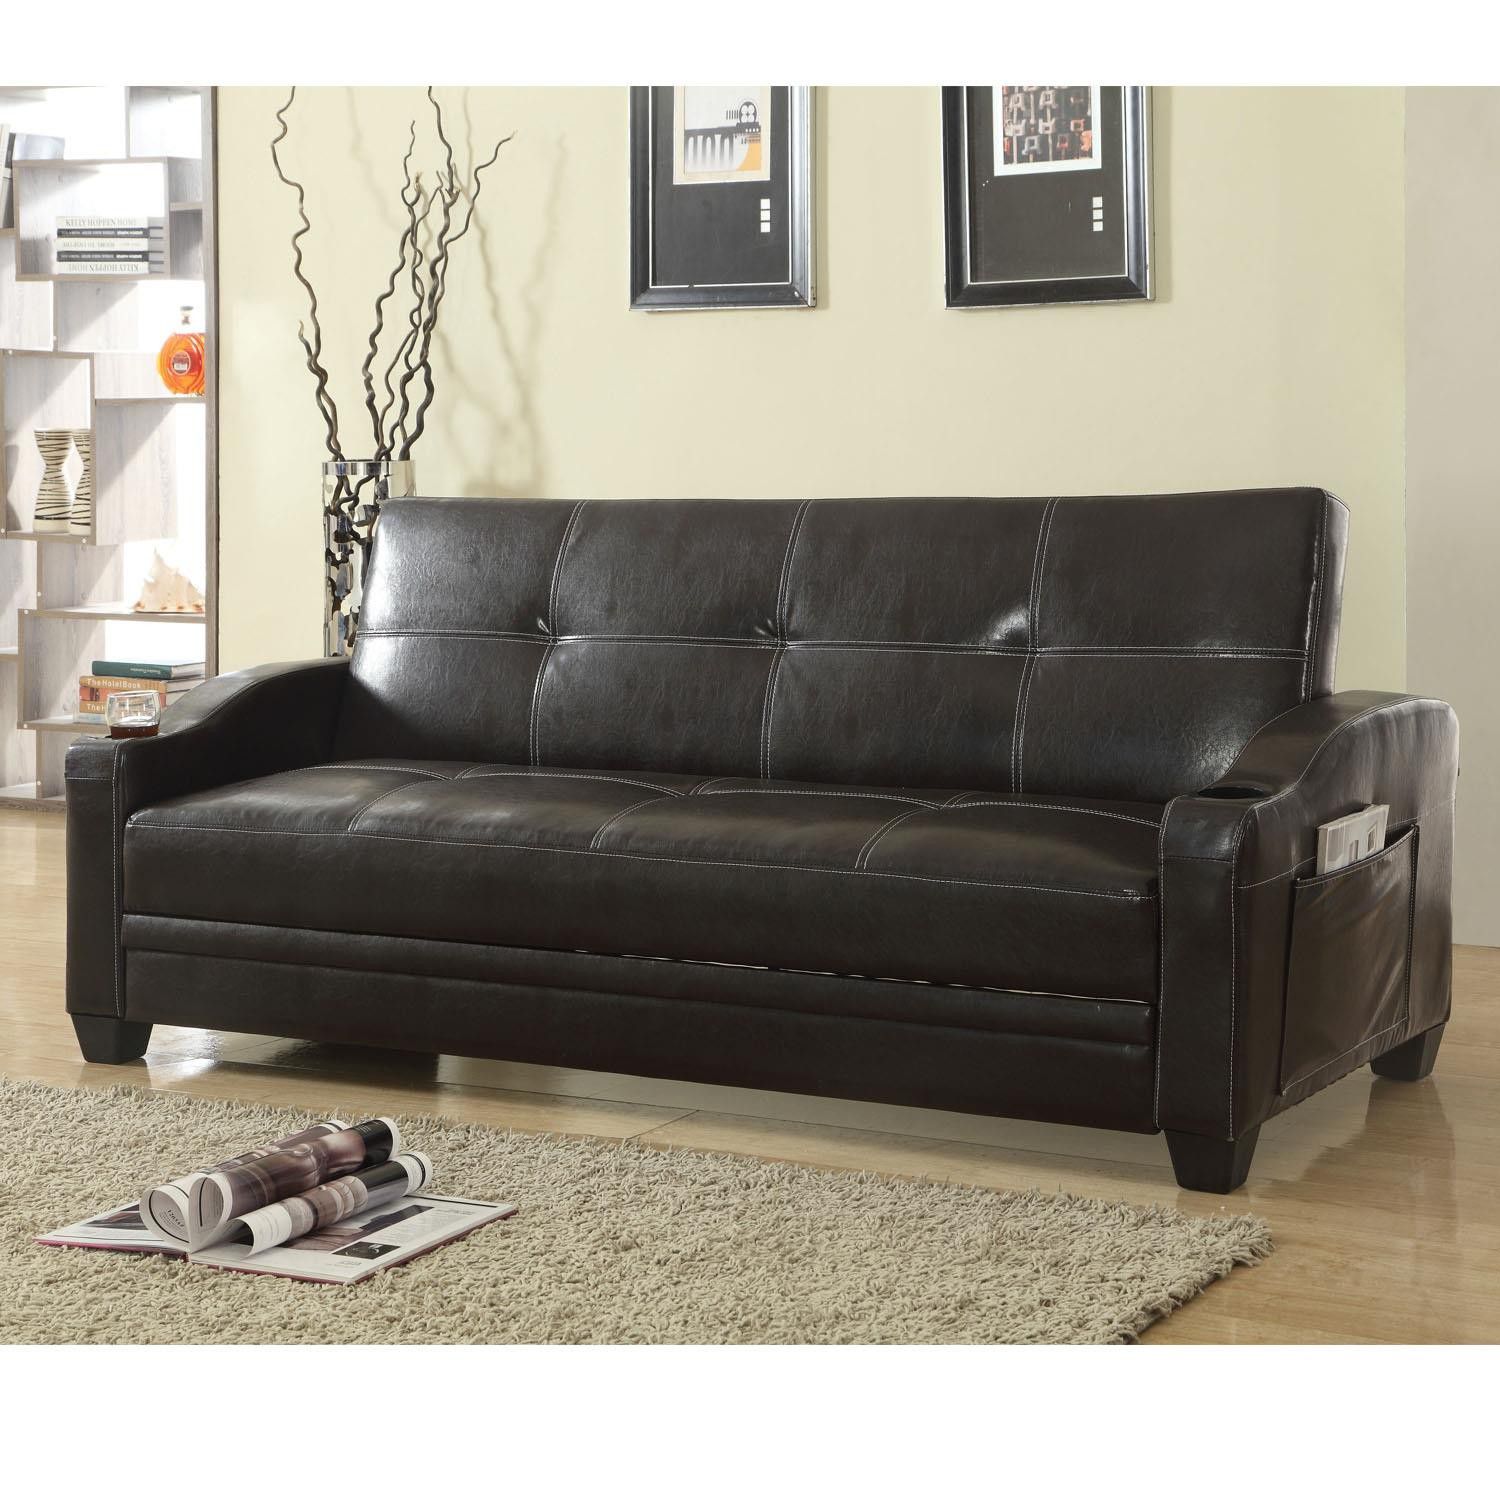 SOFA BED, "WAREHOUSES CLOSEOUTS SALE UP TO 70% OFF"